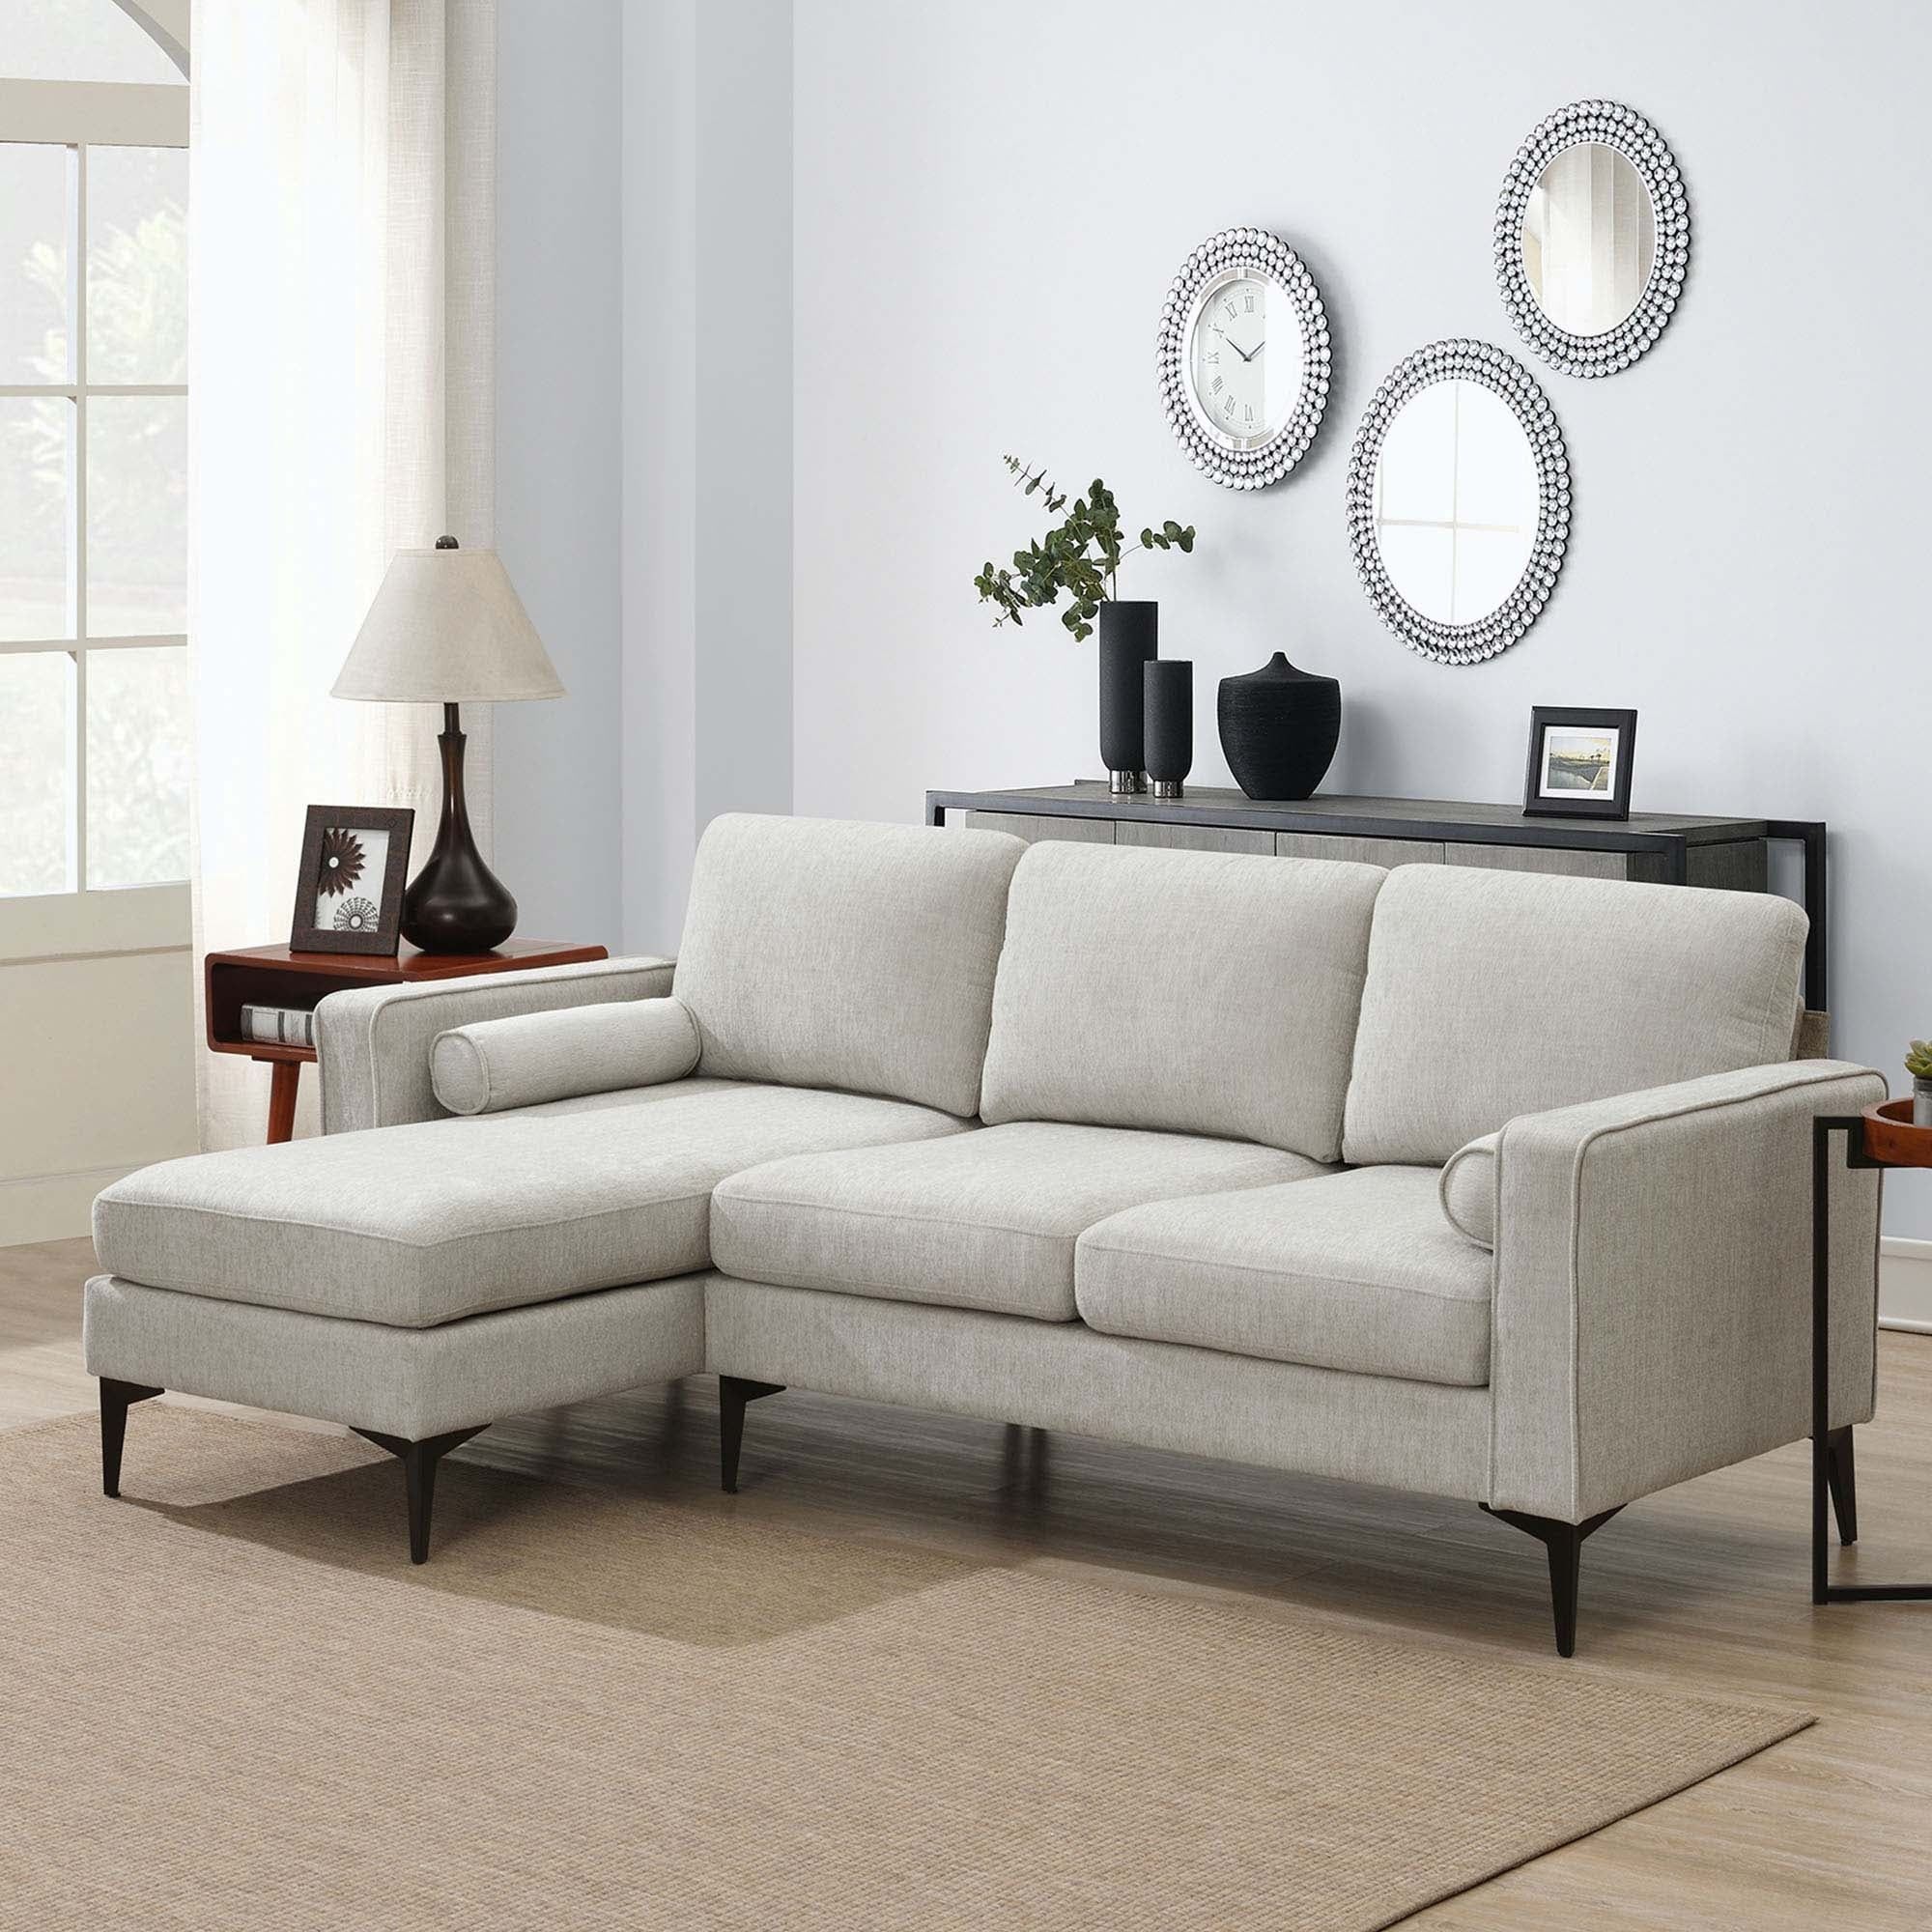 84 " Modern L Shaped Sofa With Reversible Chaise Lounge – Bed Bath & Beyond  – 37385485 For L Shape Couches With Reversible Chaises (View 8 of 15)